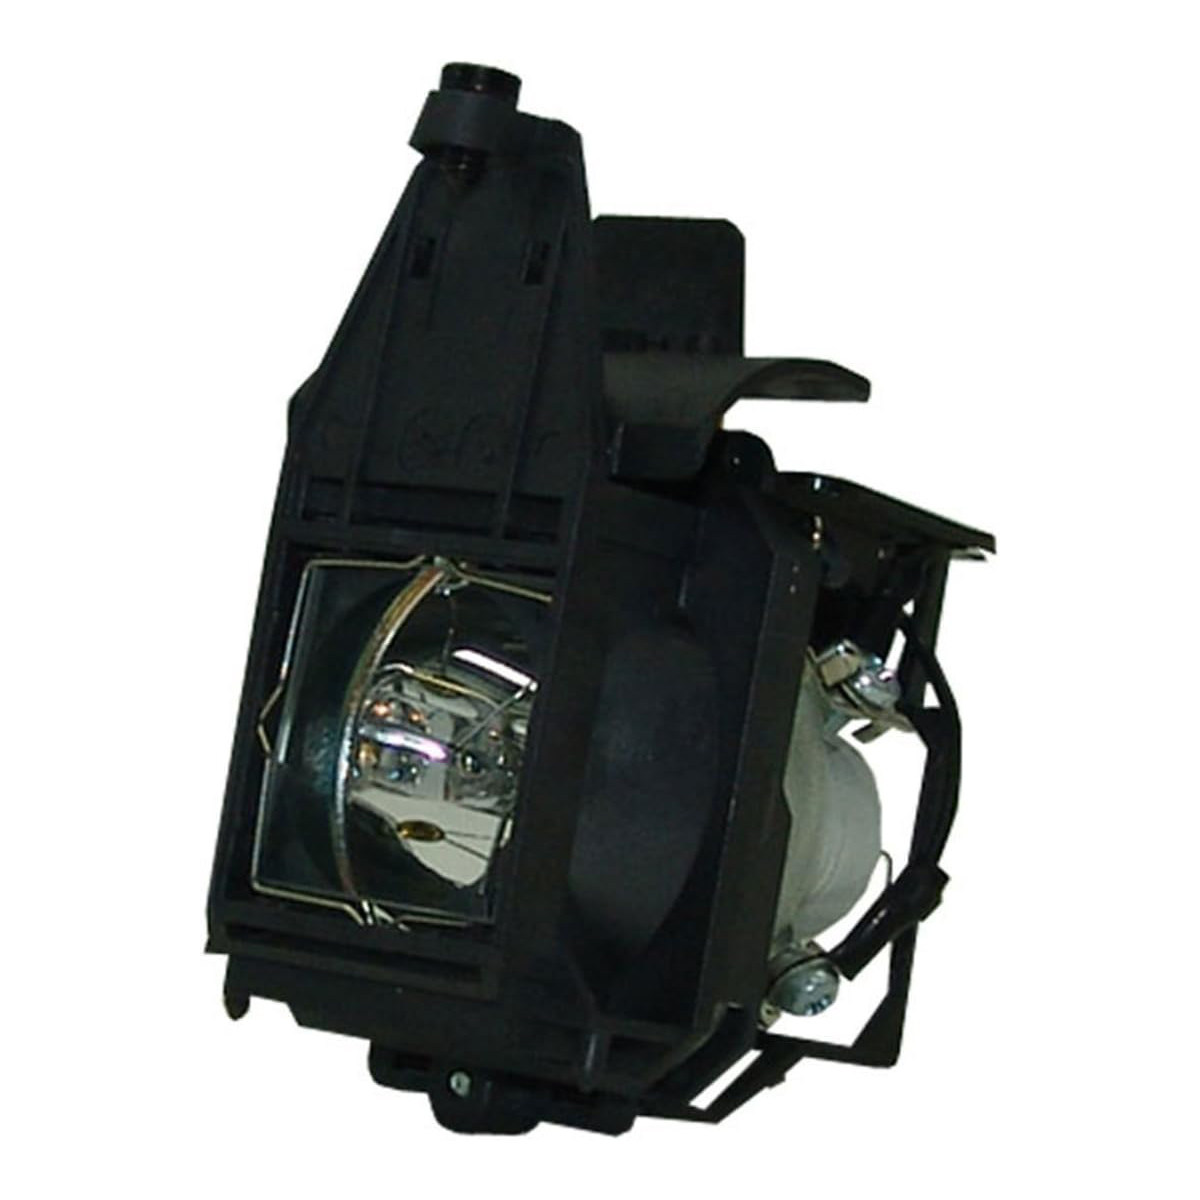 Replacement Projector lamp 456-223 For Dukane Projector